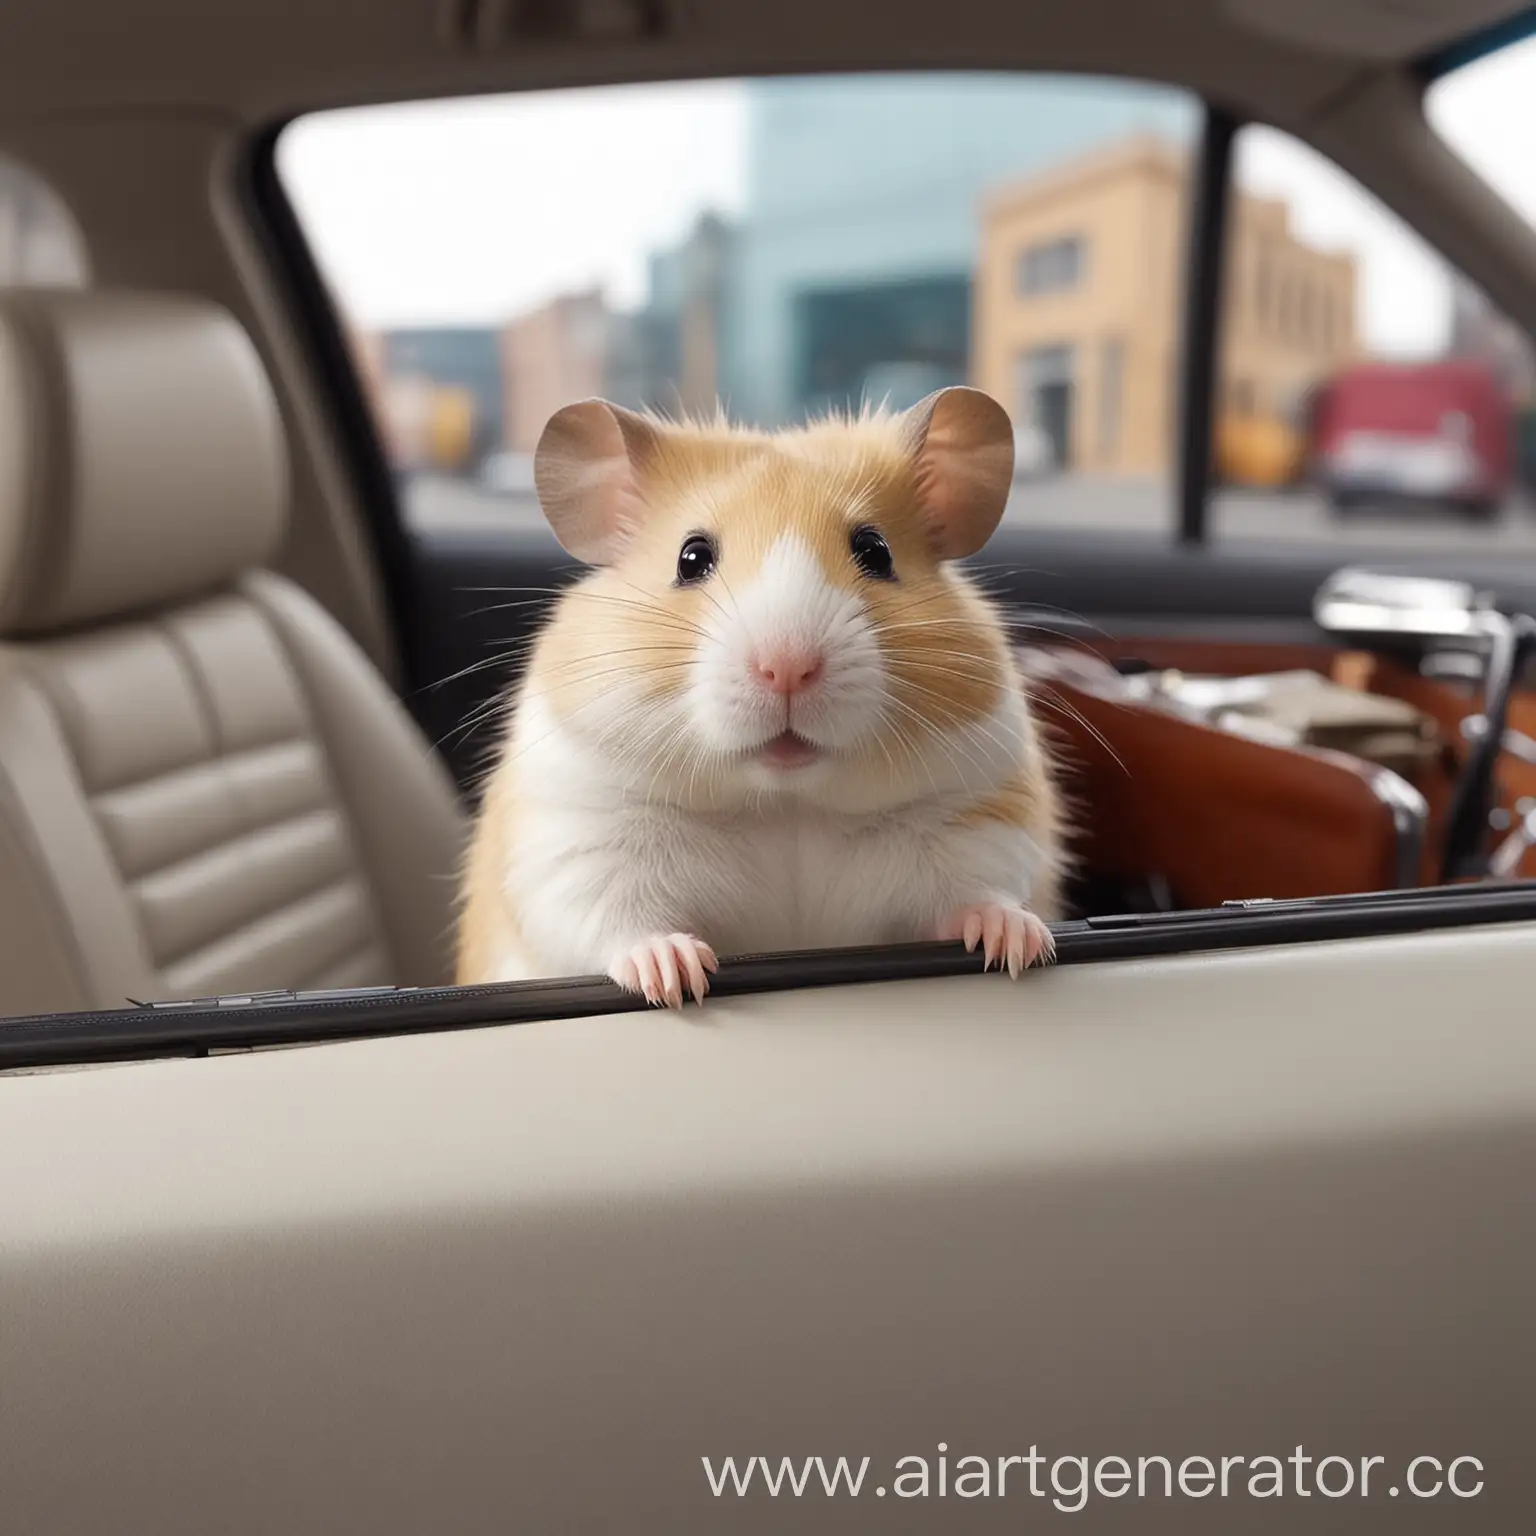 Blatnoy hamster goes to a business meeting in a car, ultrarealistically